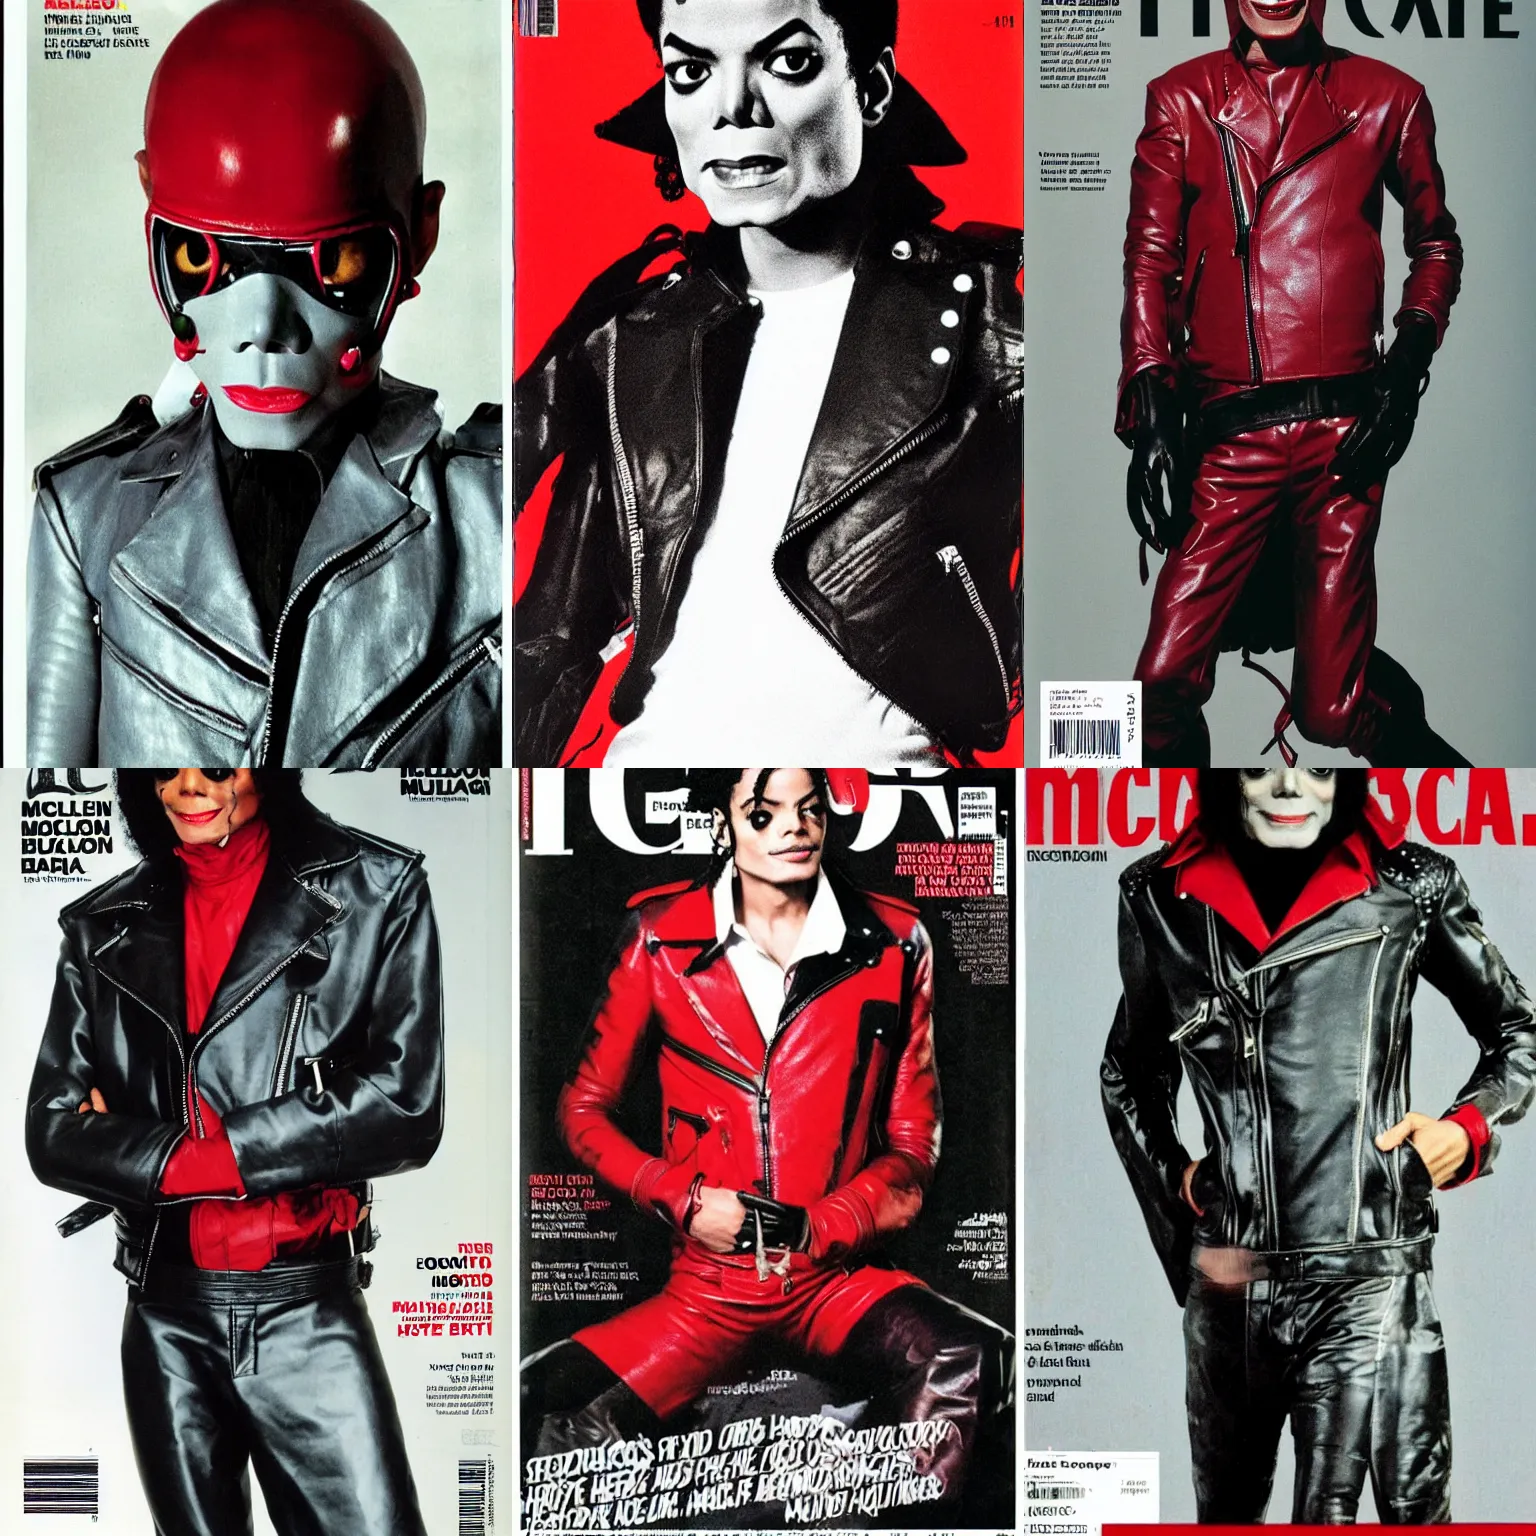 Prompt: bald michael jackson, with grey skin, huge bulbous black eyes, sectoid, alien head, martian, wearing the red leather motorcycle jacket from thriller, high fashion magazine cover.